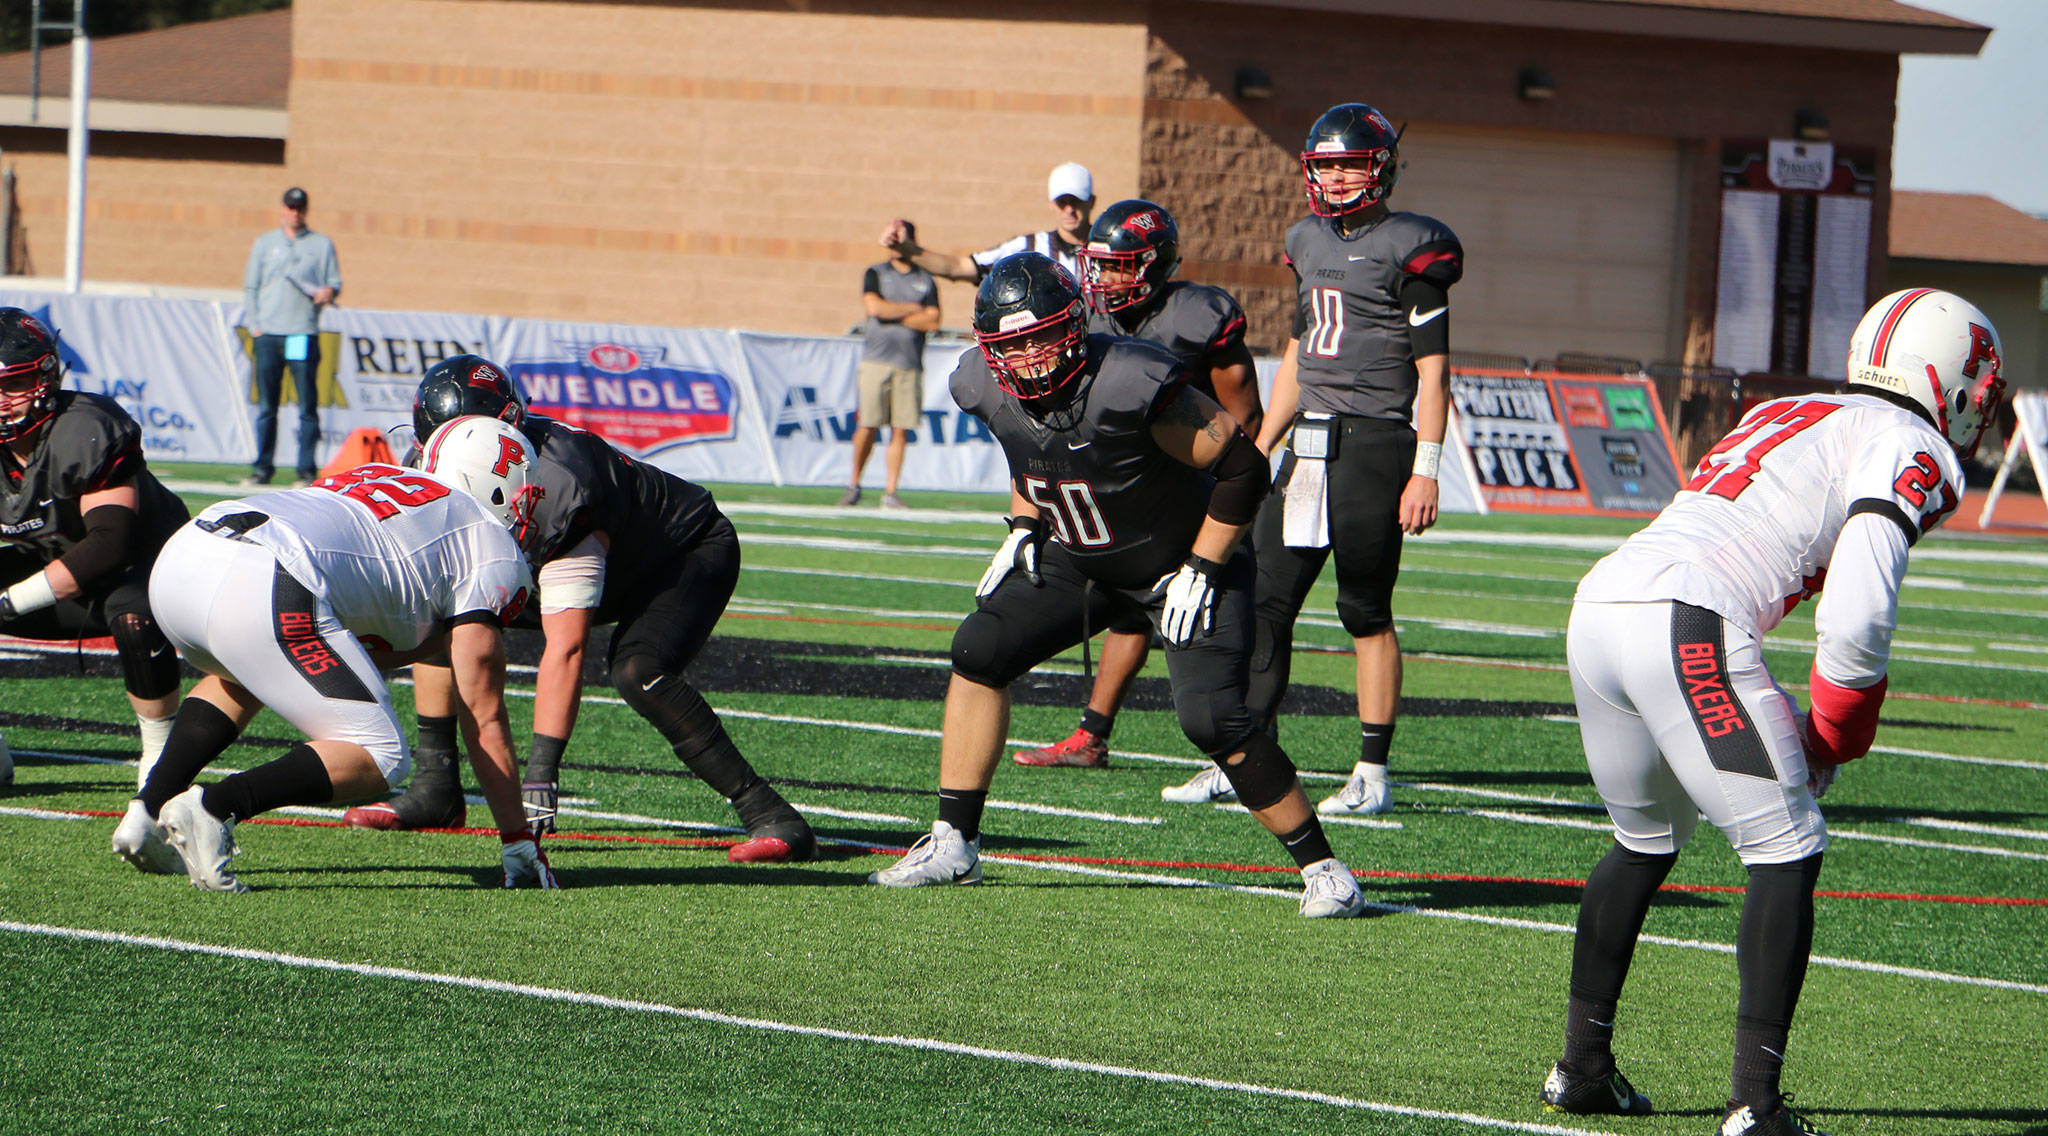 Tyler Adamson (50) earned numerous honors as he anchored the Whitworth University line the past three season. (Photo courtsey of Whitworth Athletics)